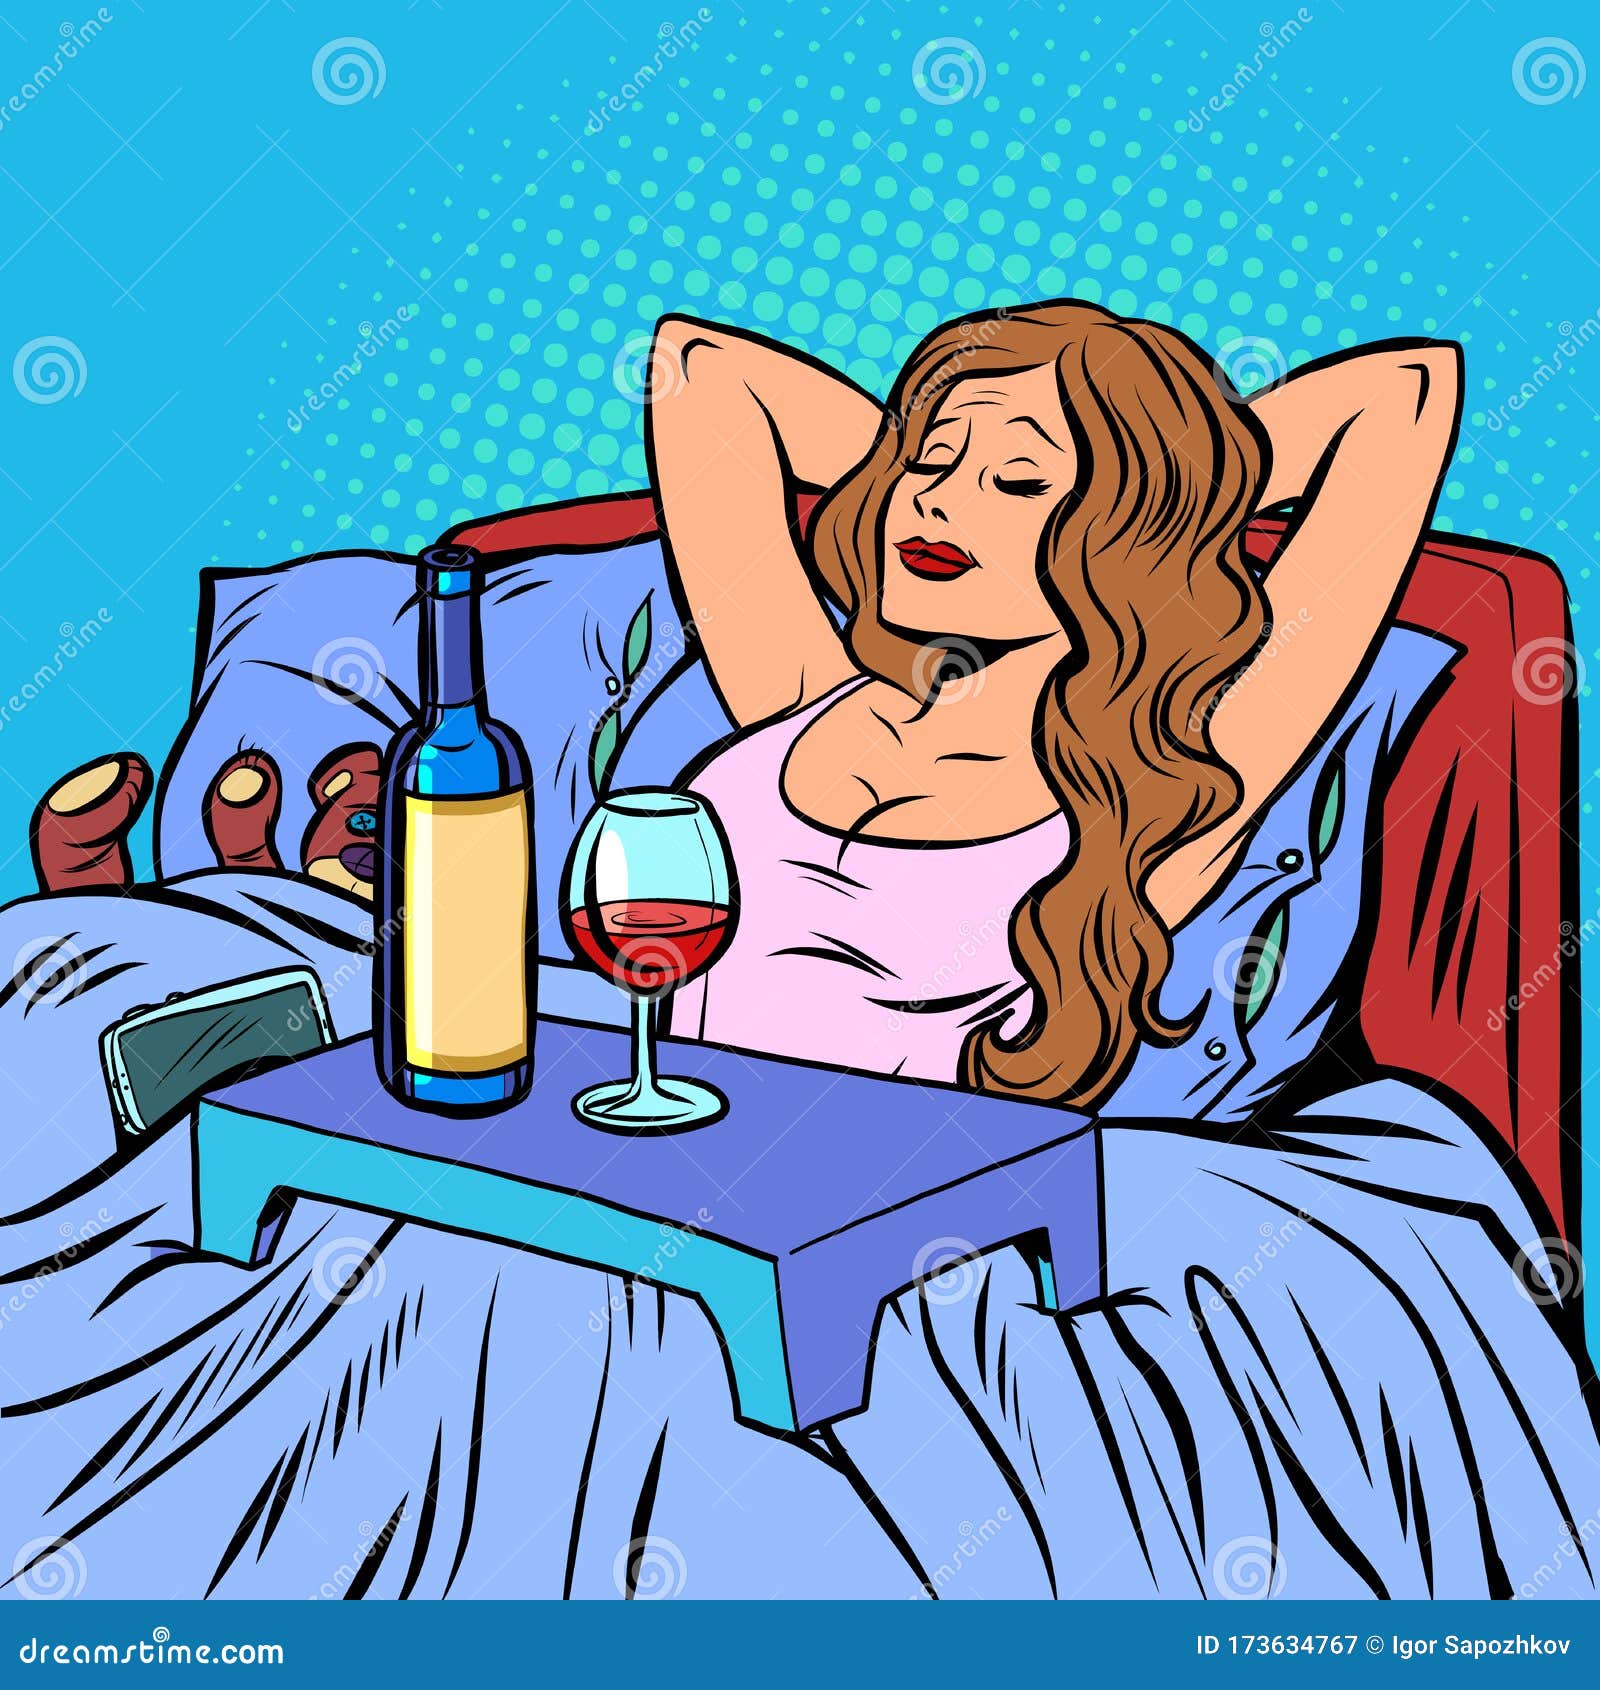 A woman drinks wine alone stock vector. Illustration of alone - 173634767